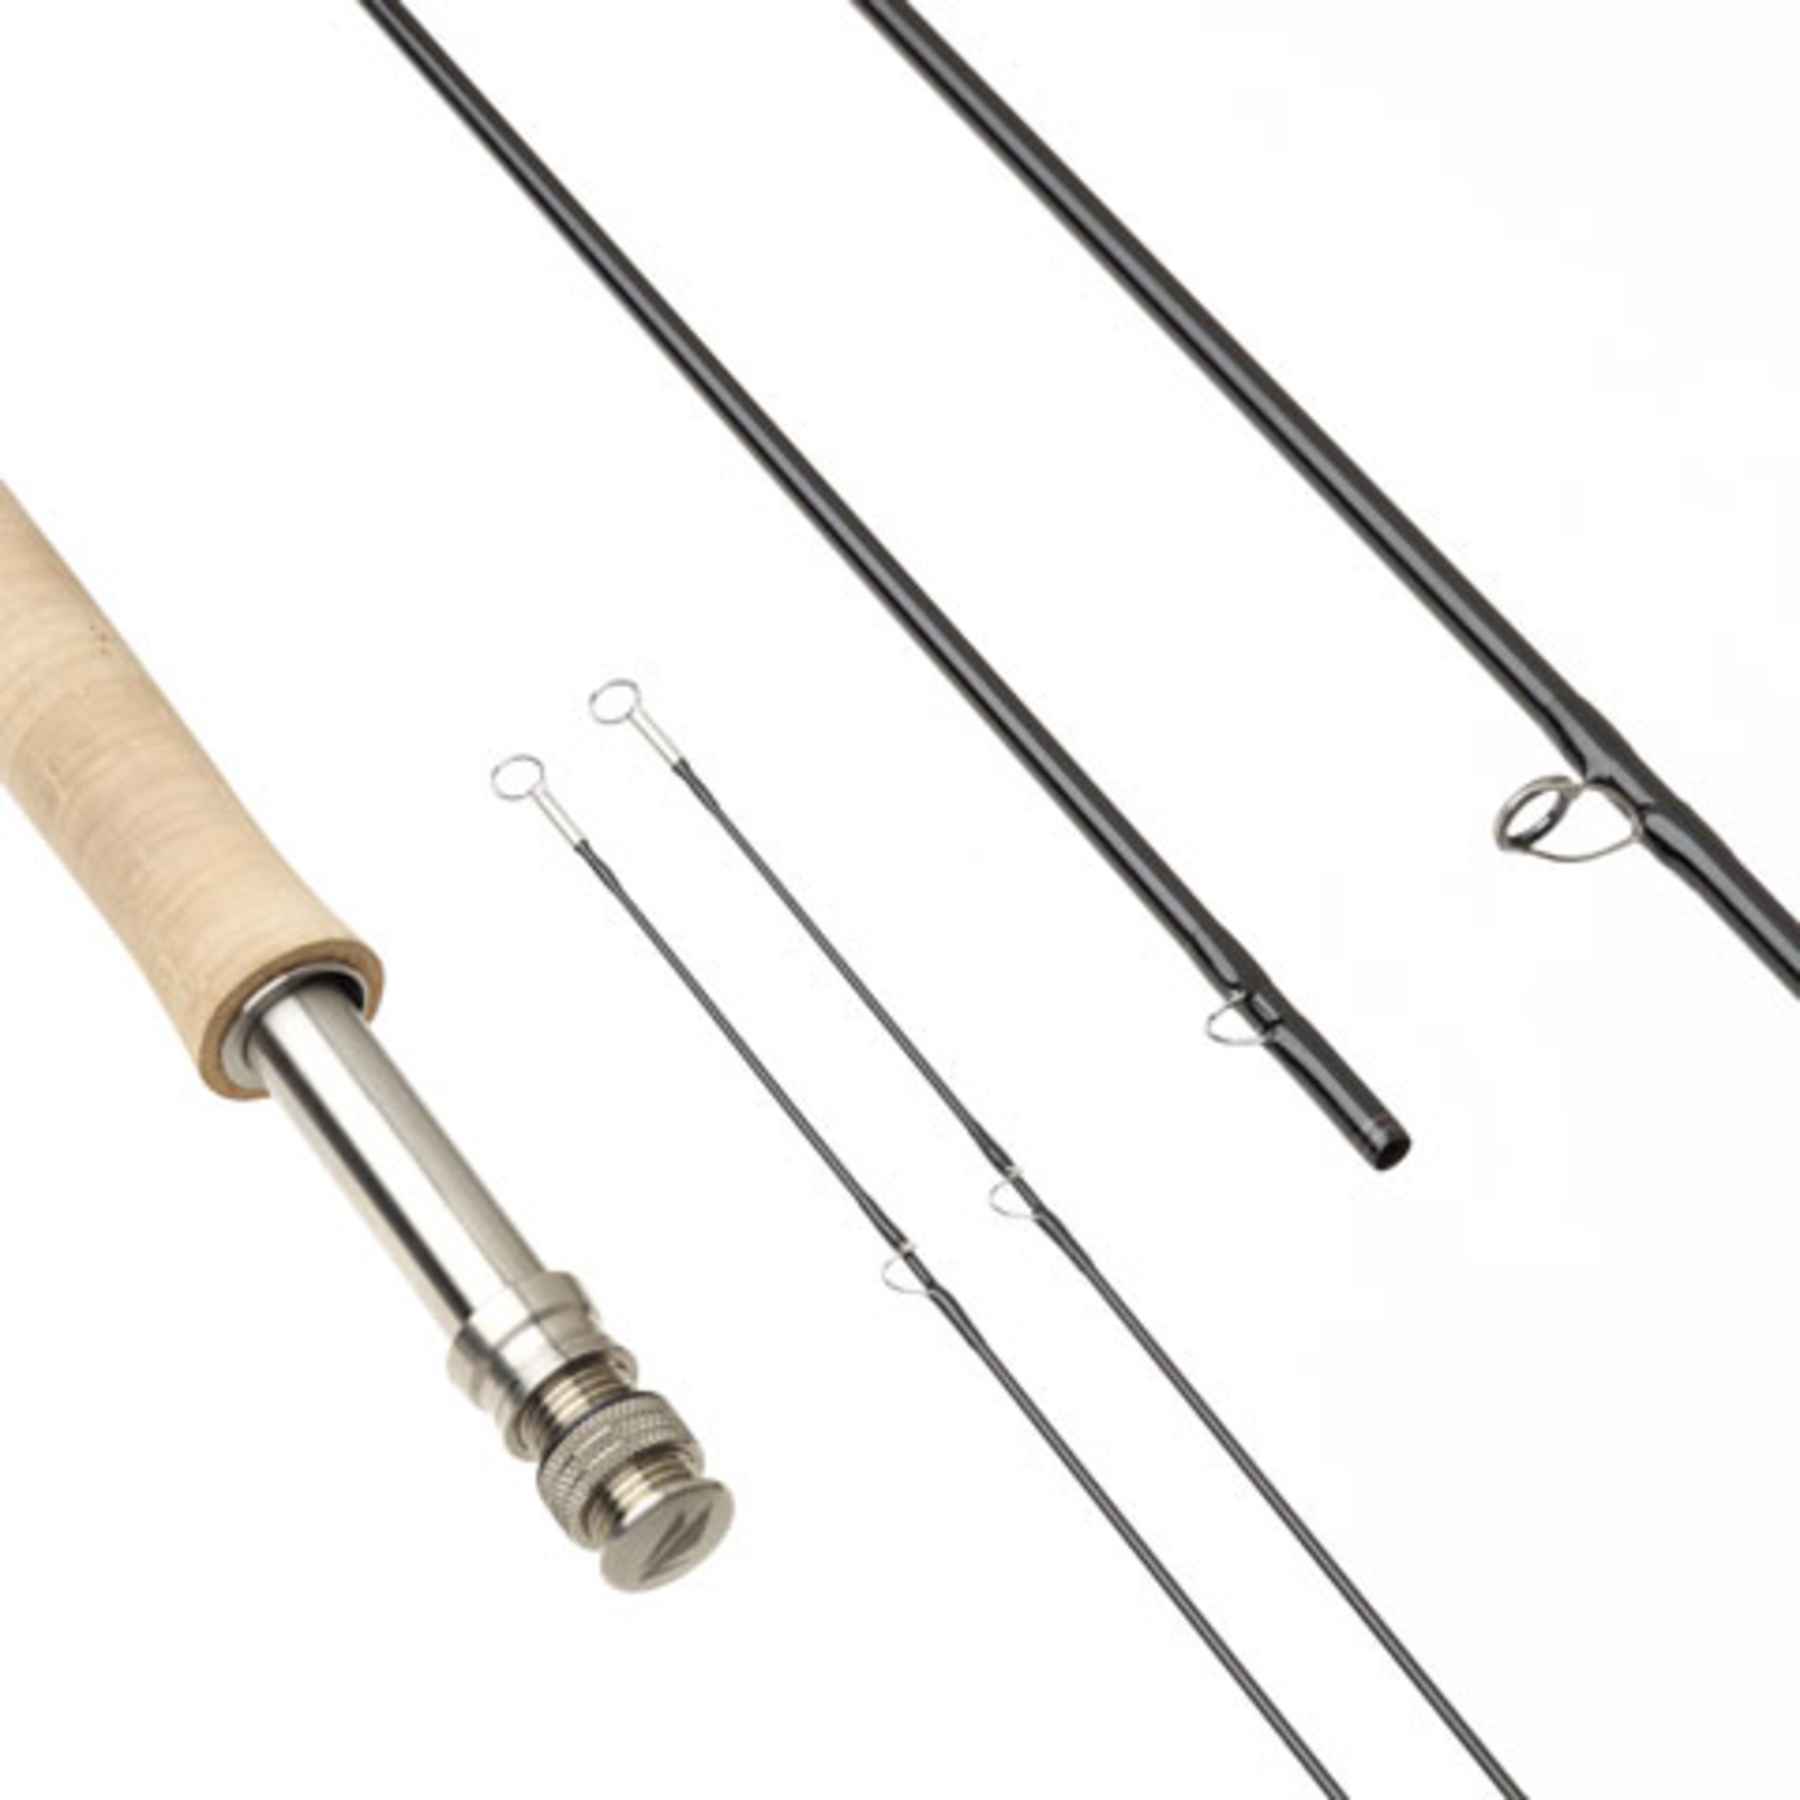 Sage Announces Several All New Fly Rod Series